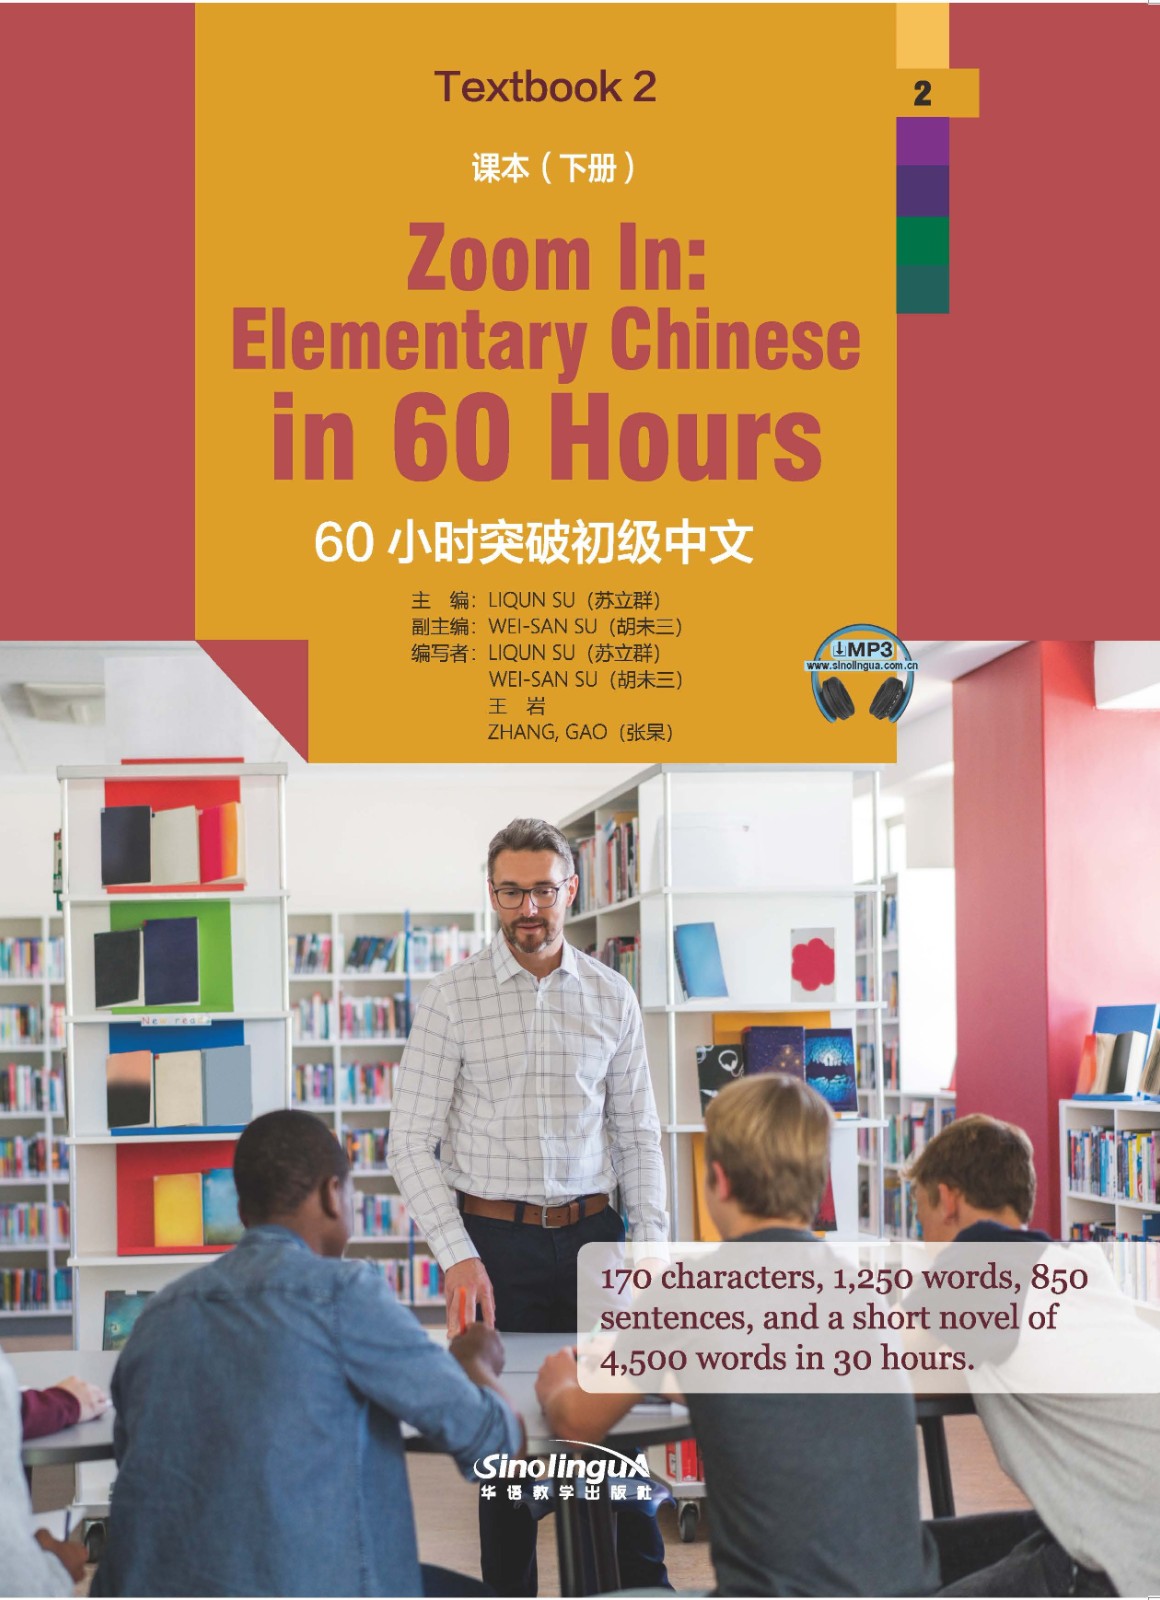 Zoom In: Elementary Chinese in 60 Hours Textbook 2